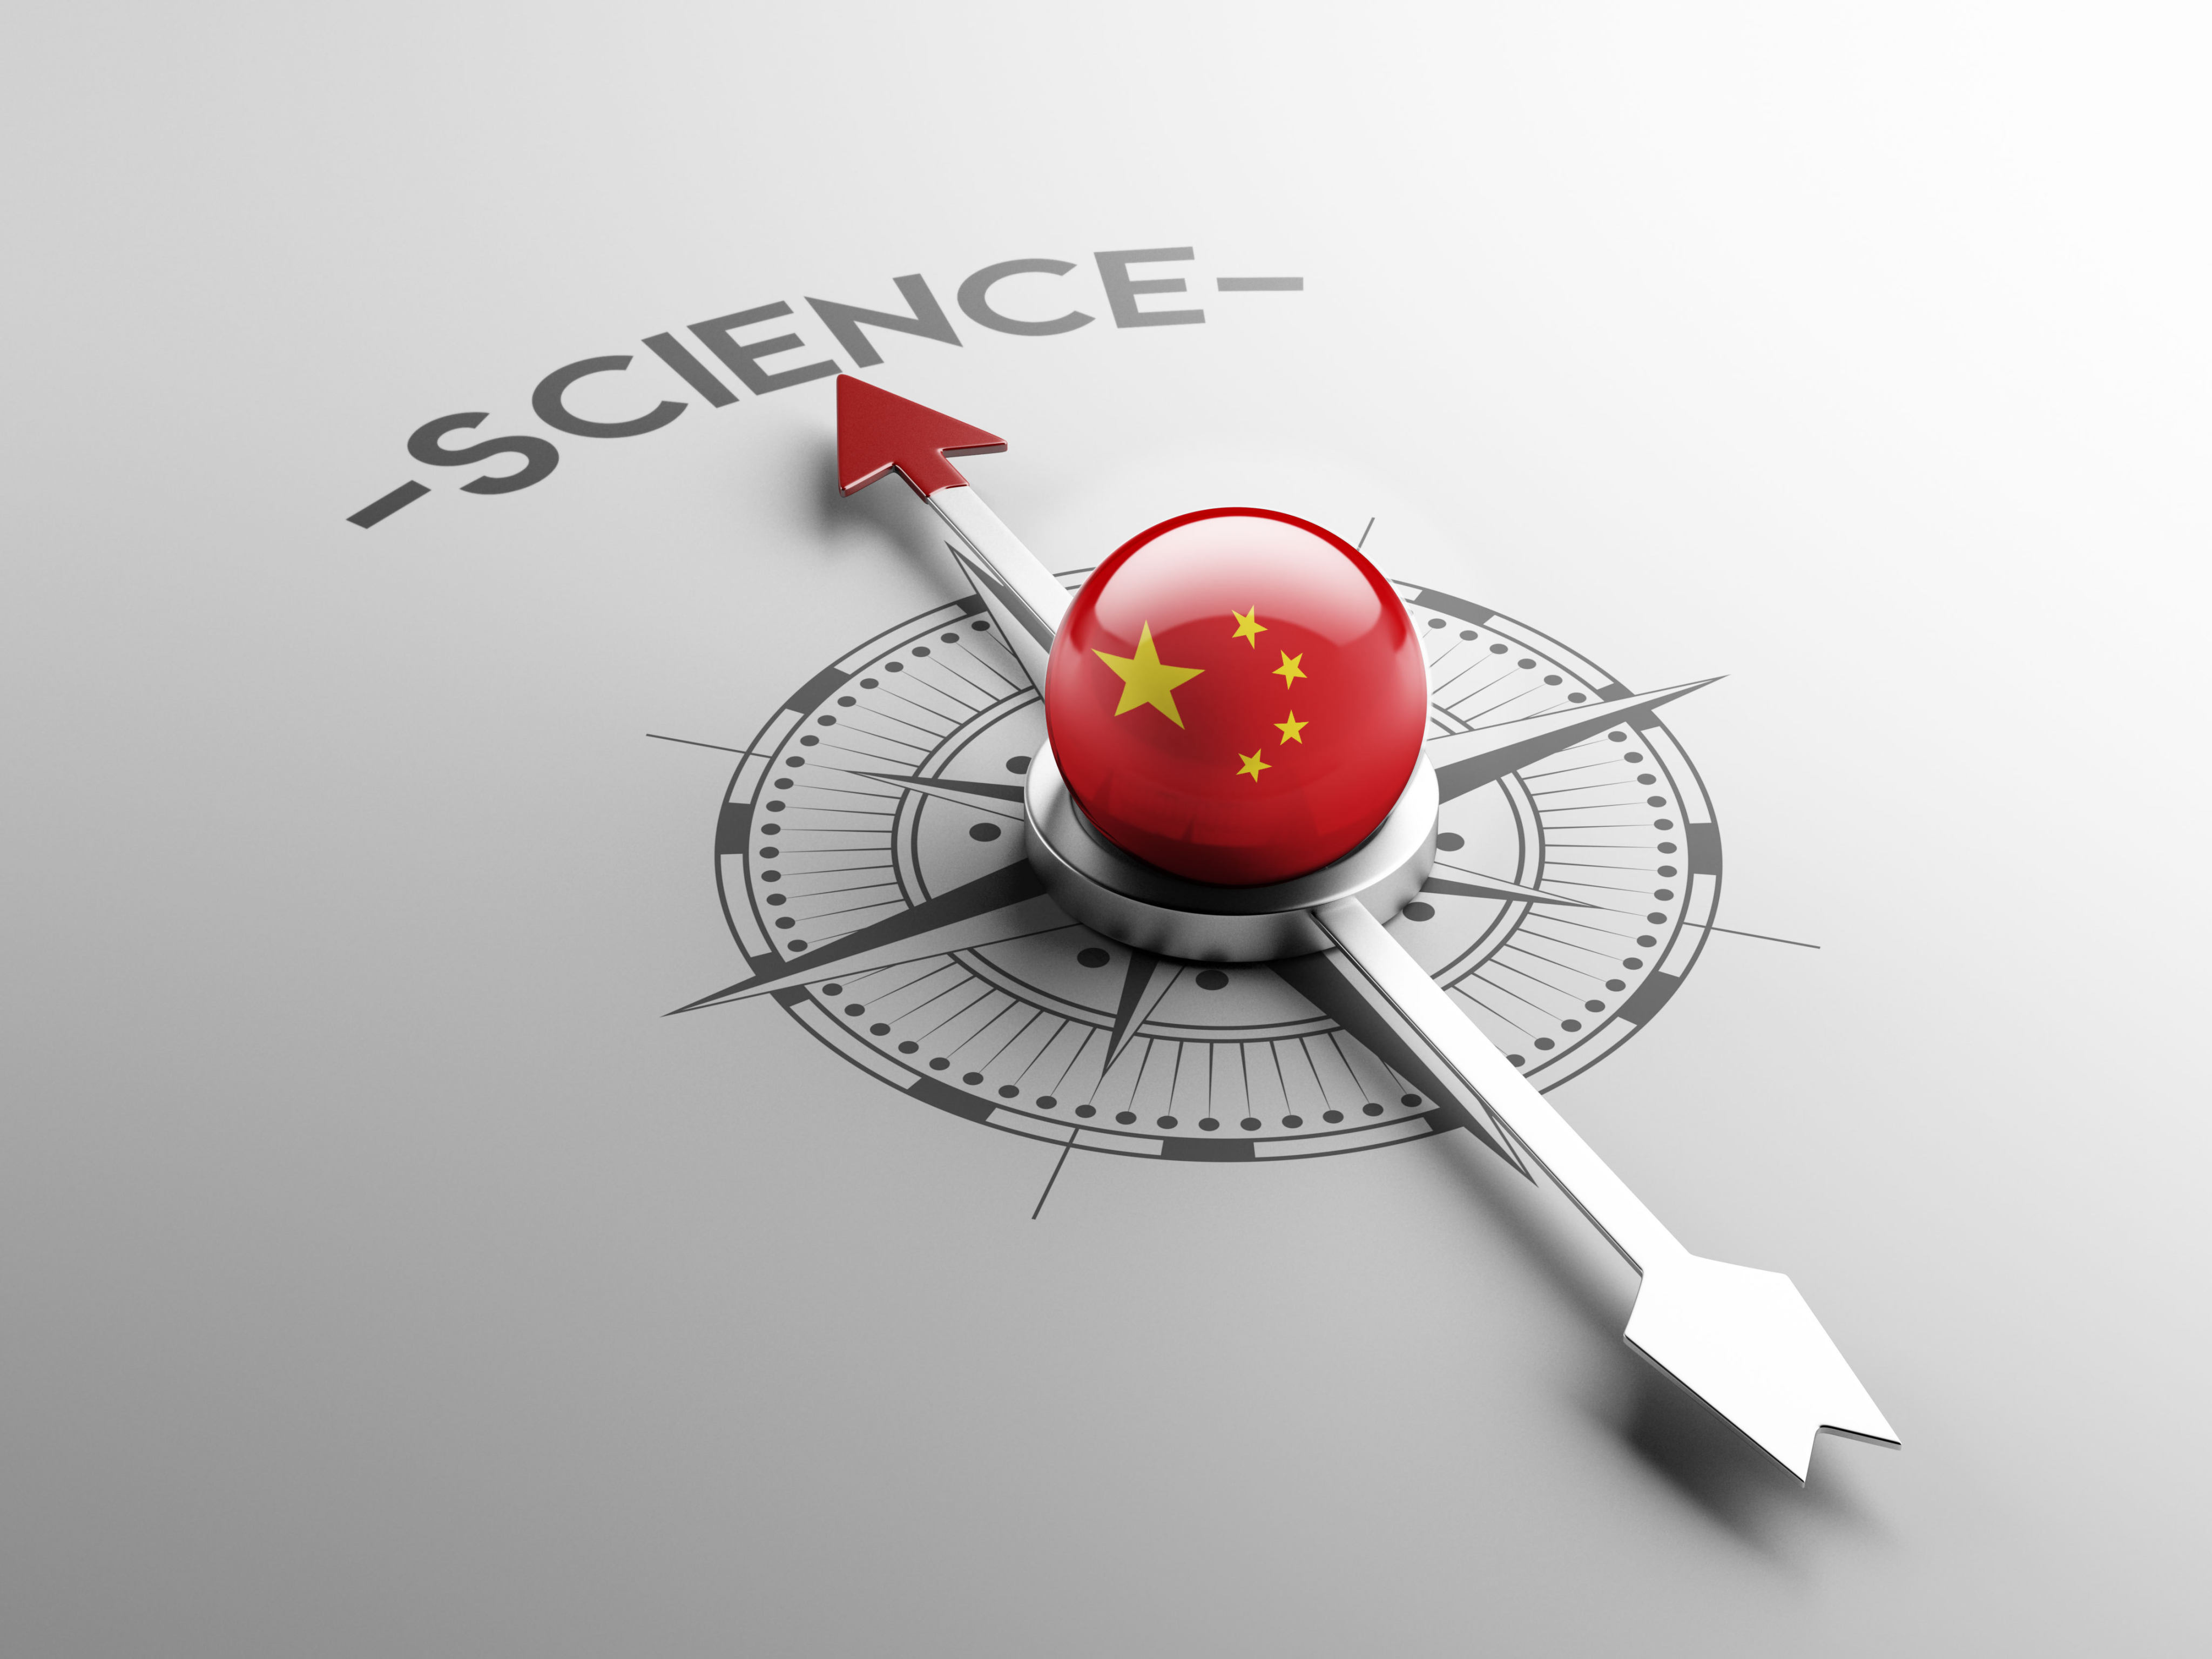 China plans to accelerate the reform of the country’s scientific and technical journals. Photo: Shutterstock